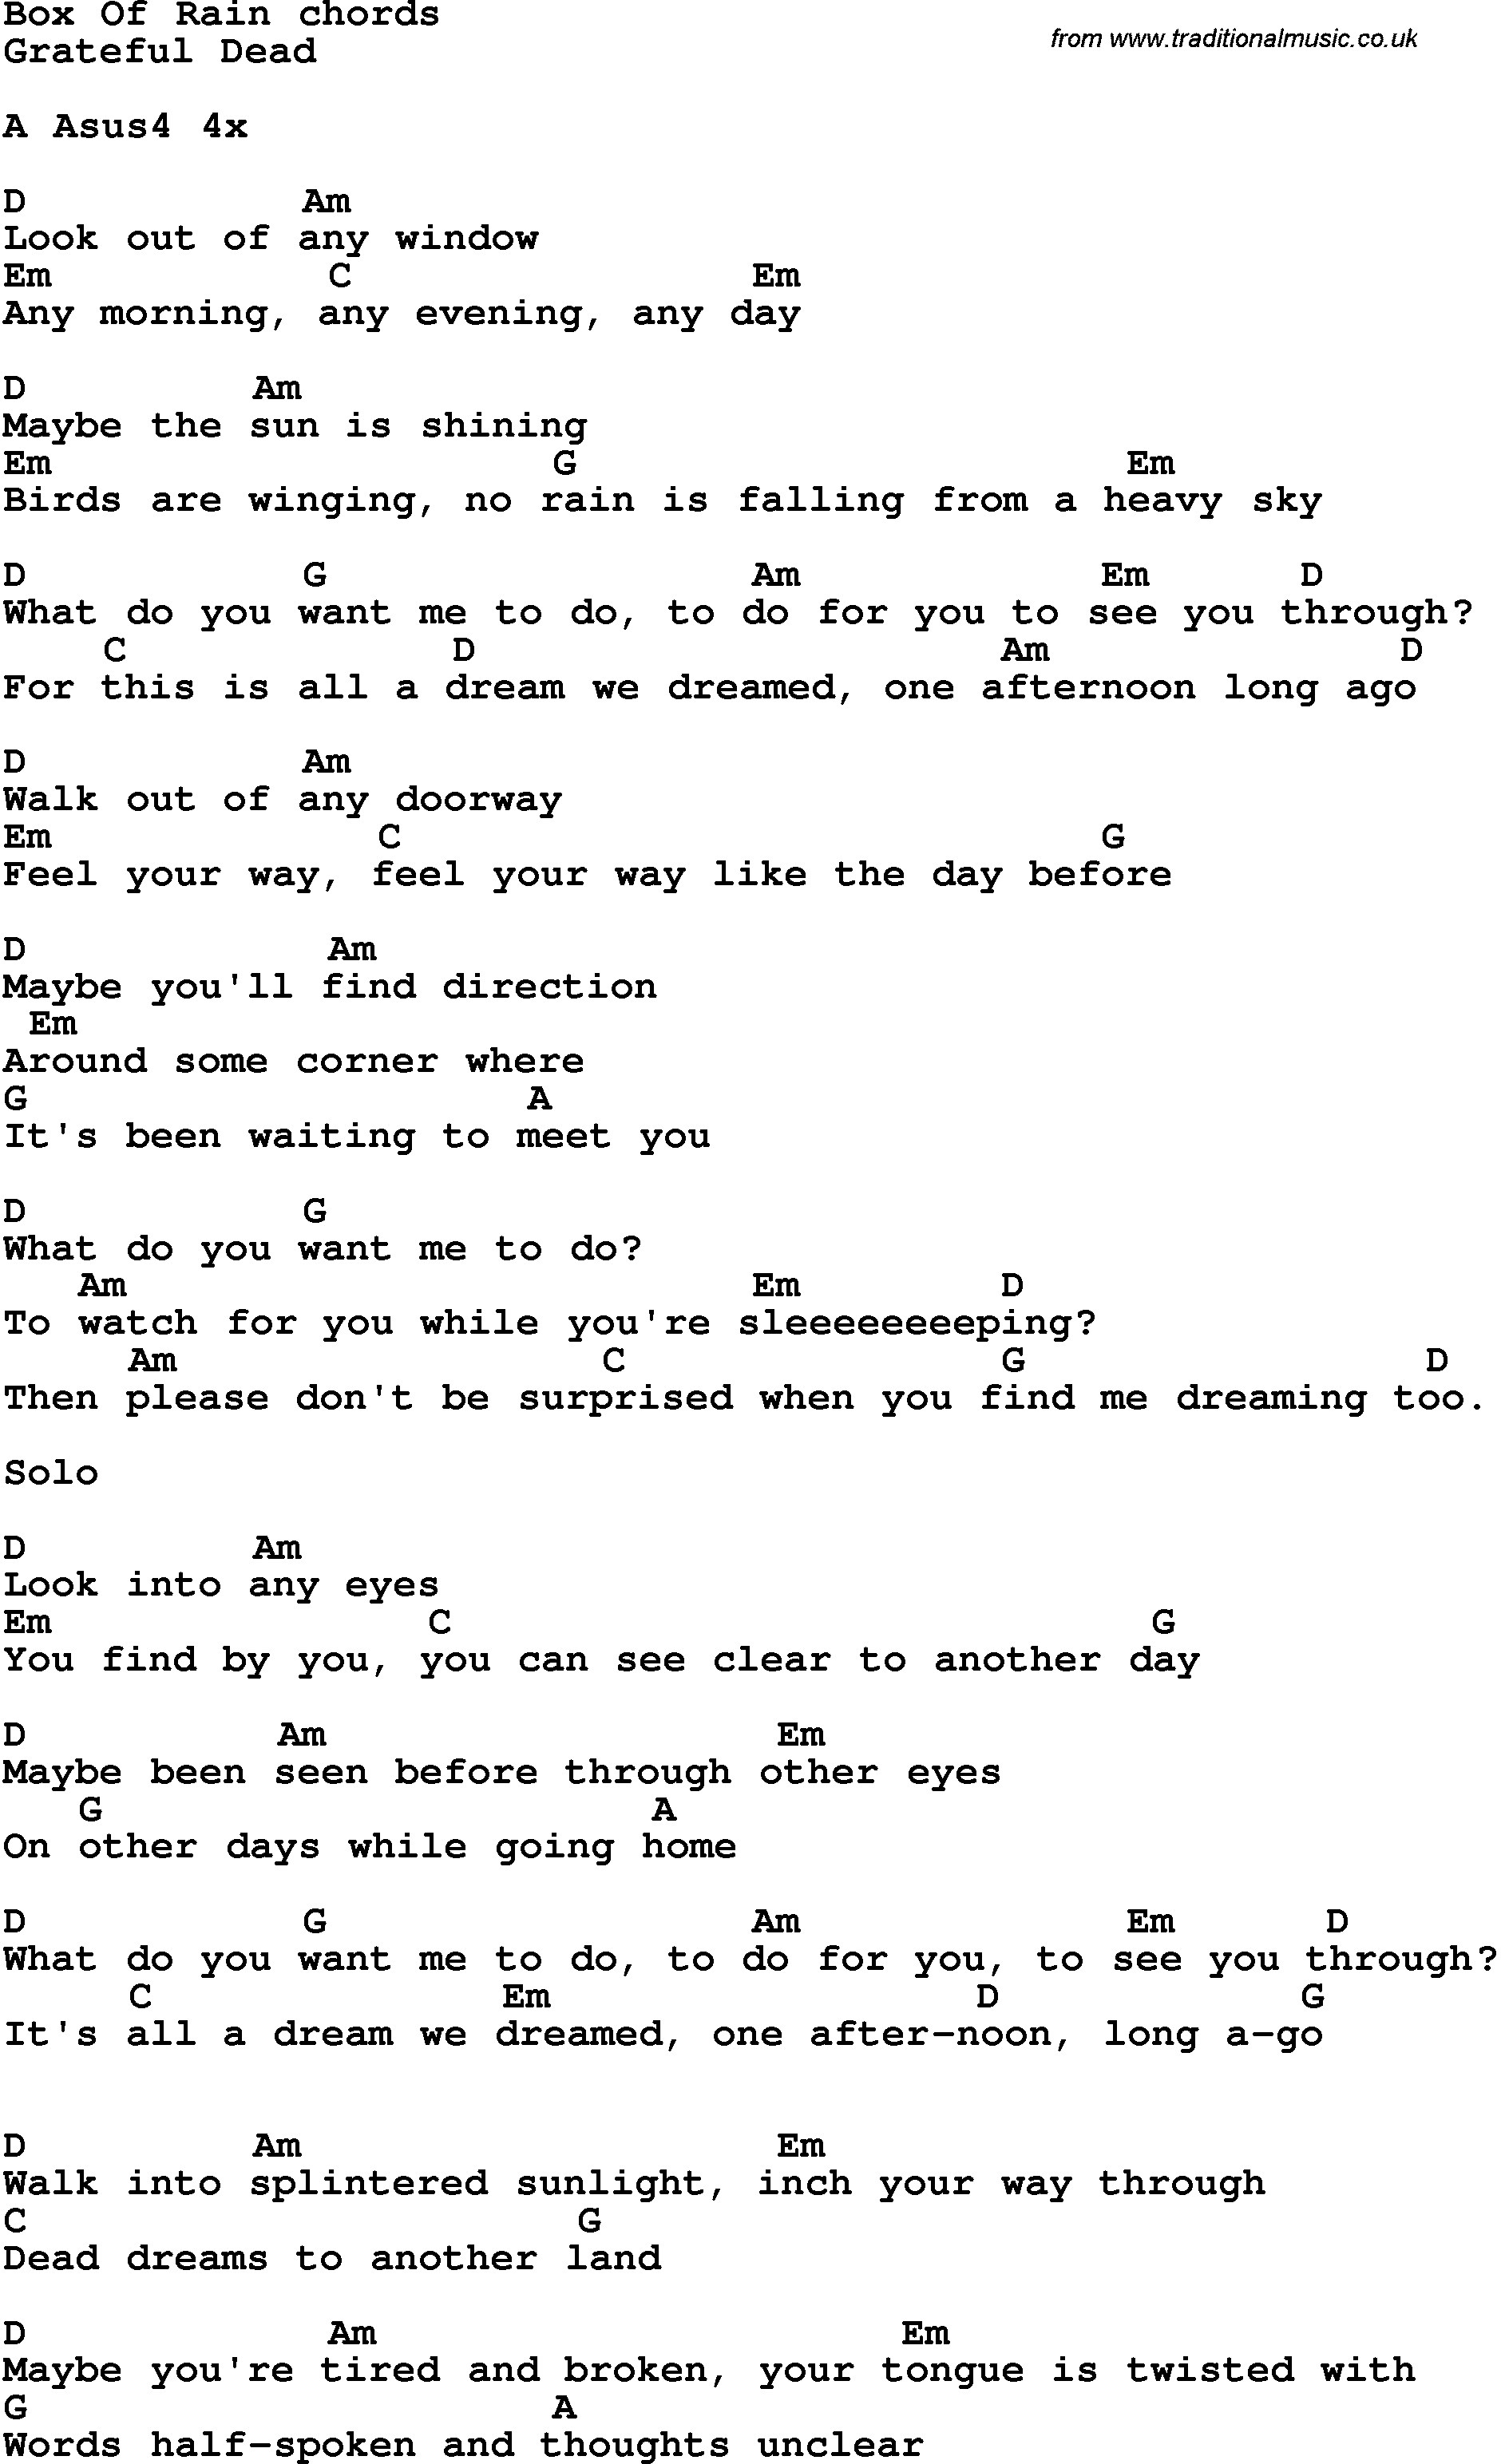 Song Lyrics with guitar chords for Box Of Rain